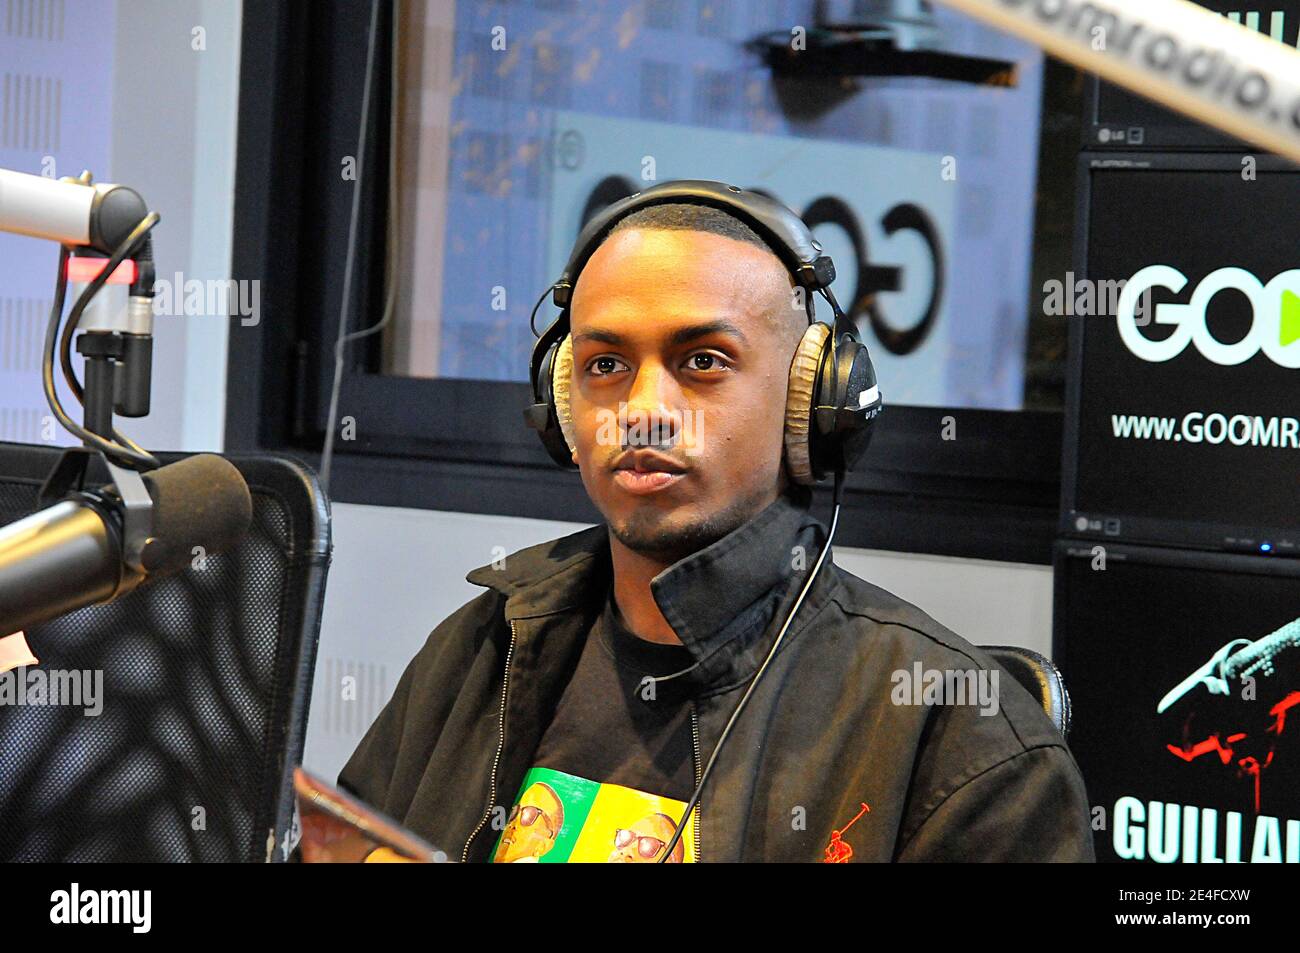 Colonel Reyel at Goom Radio during Radio show 'The Daily Live', Sevres,  near Paris, France, on March 23, 2011. Photo by Thierry  Plessis/ABACAPRESS.COM Stock Photo - Alamy